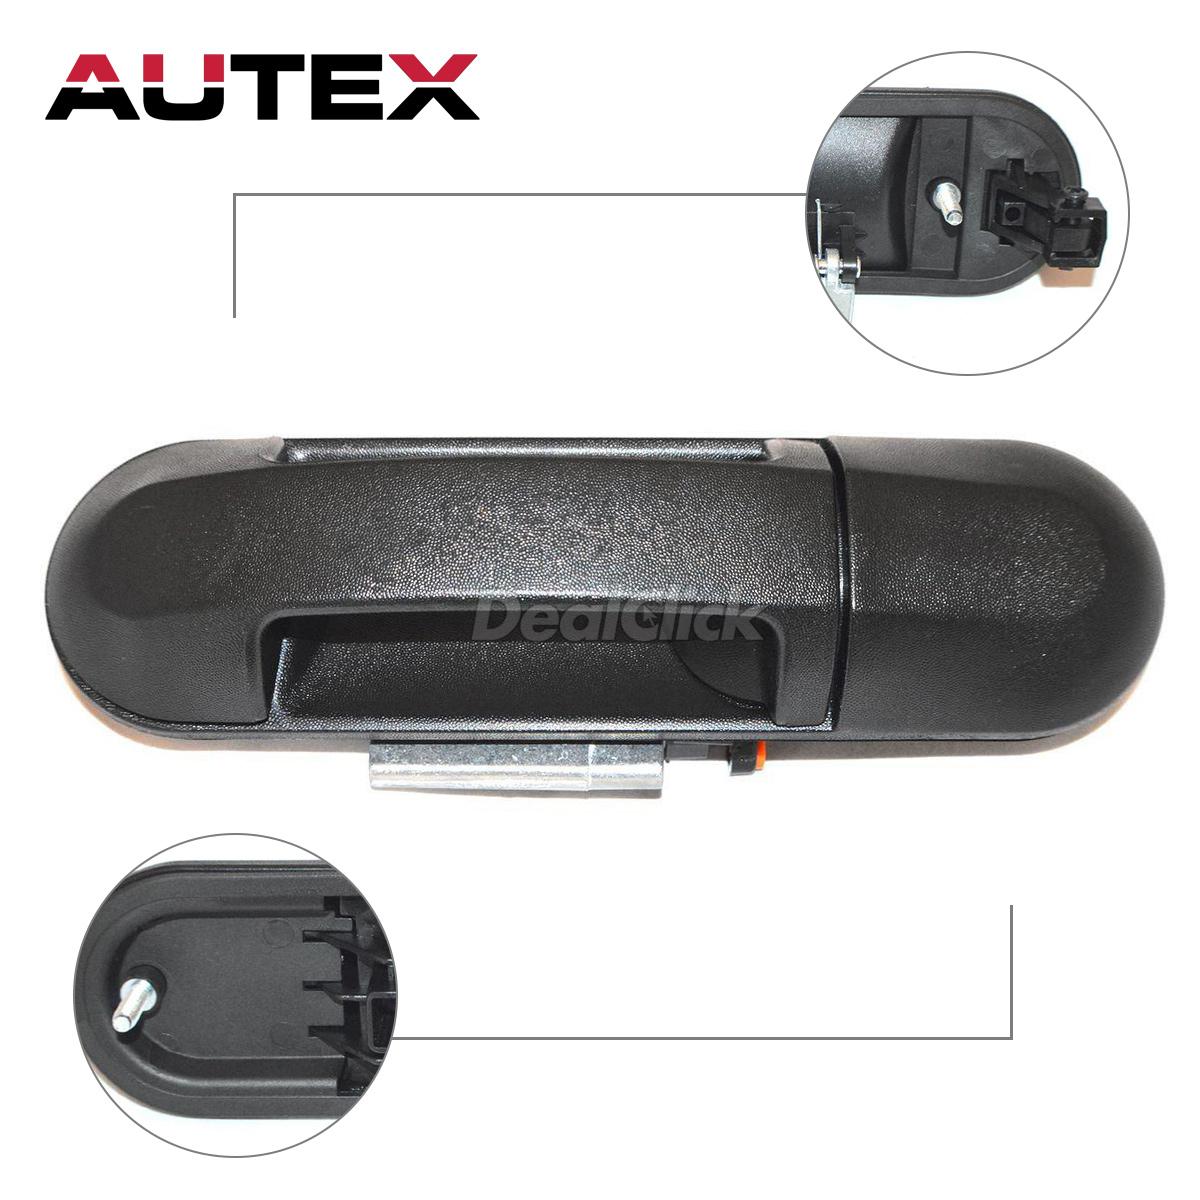 Front, Driver Side New Door Handle for Ford Explorer FO1310153 2002 to 2010